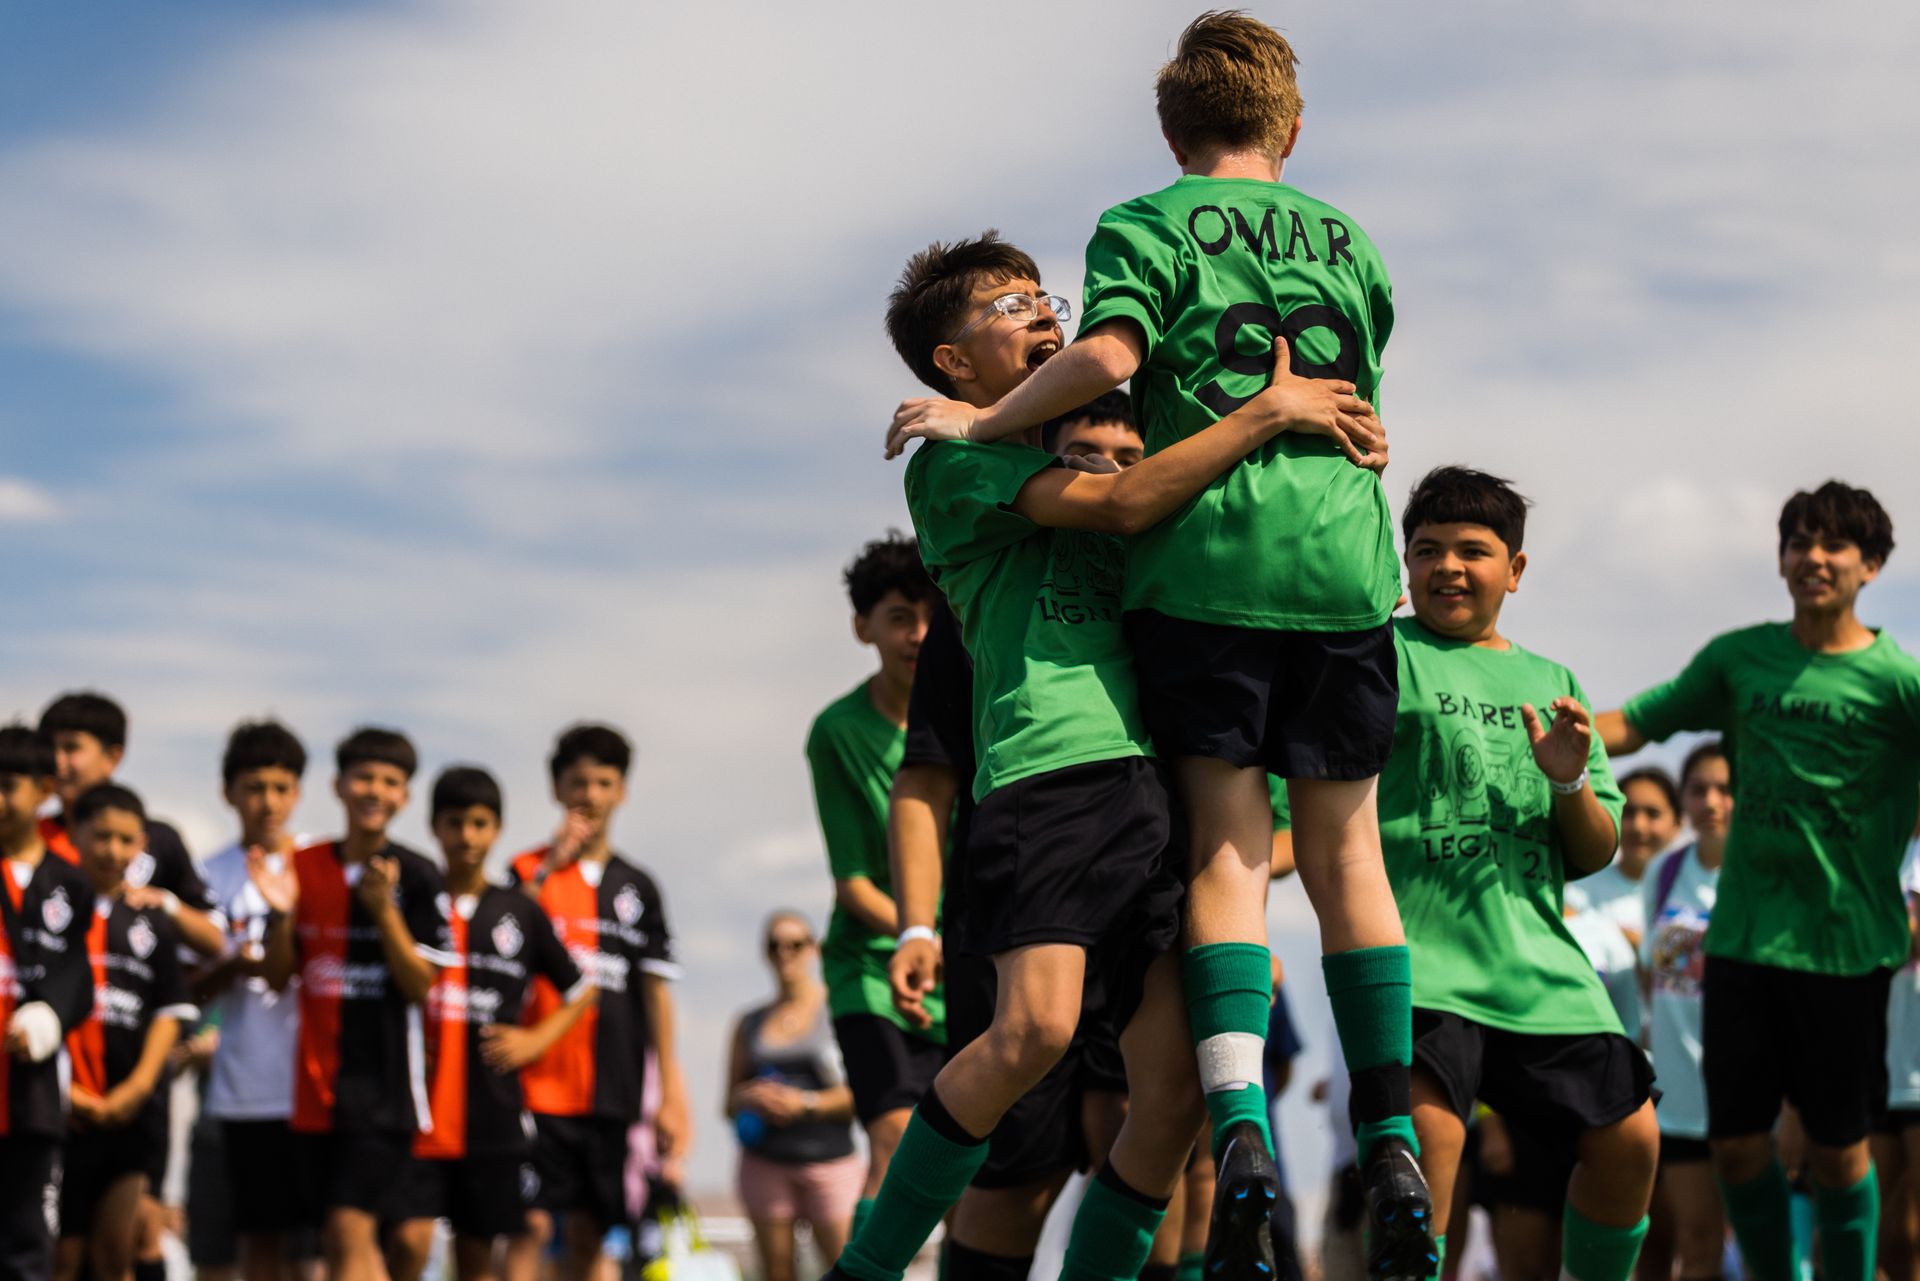 A group of young boys are hugging each other on a soccer field.